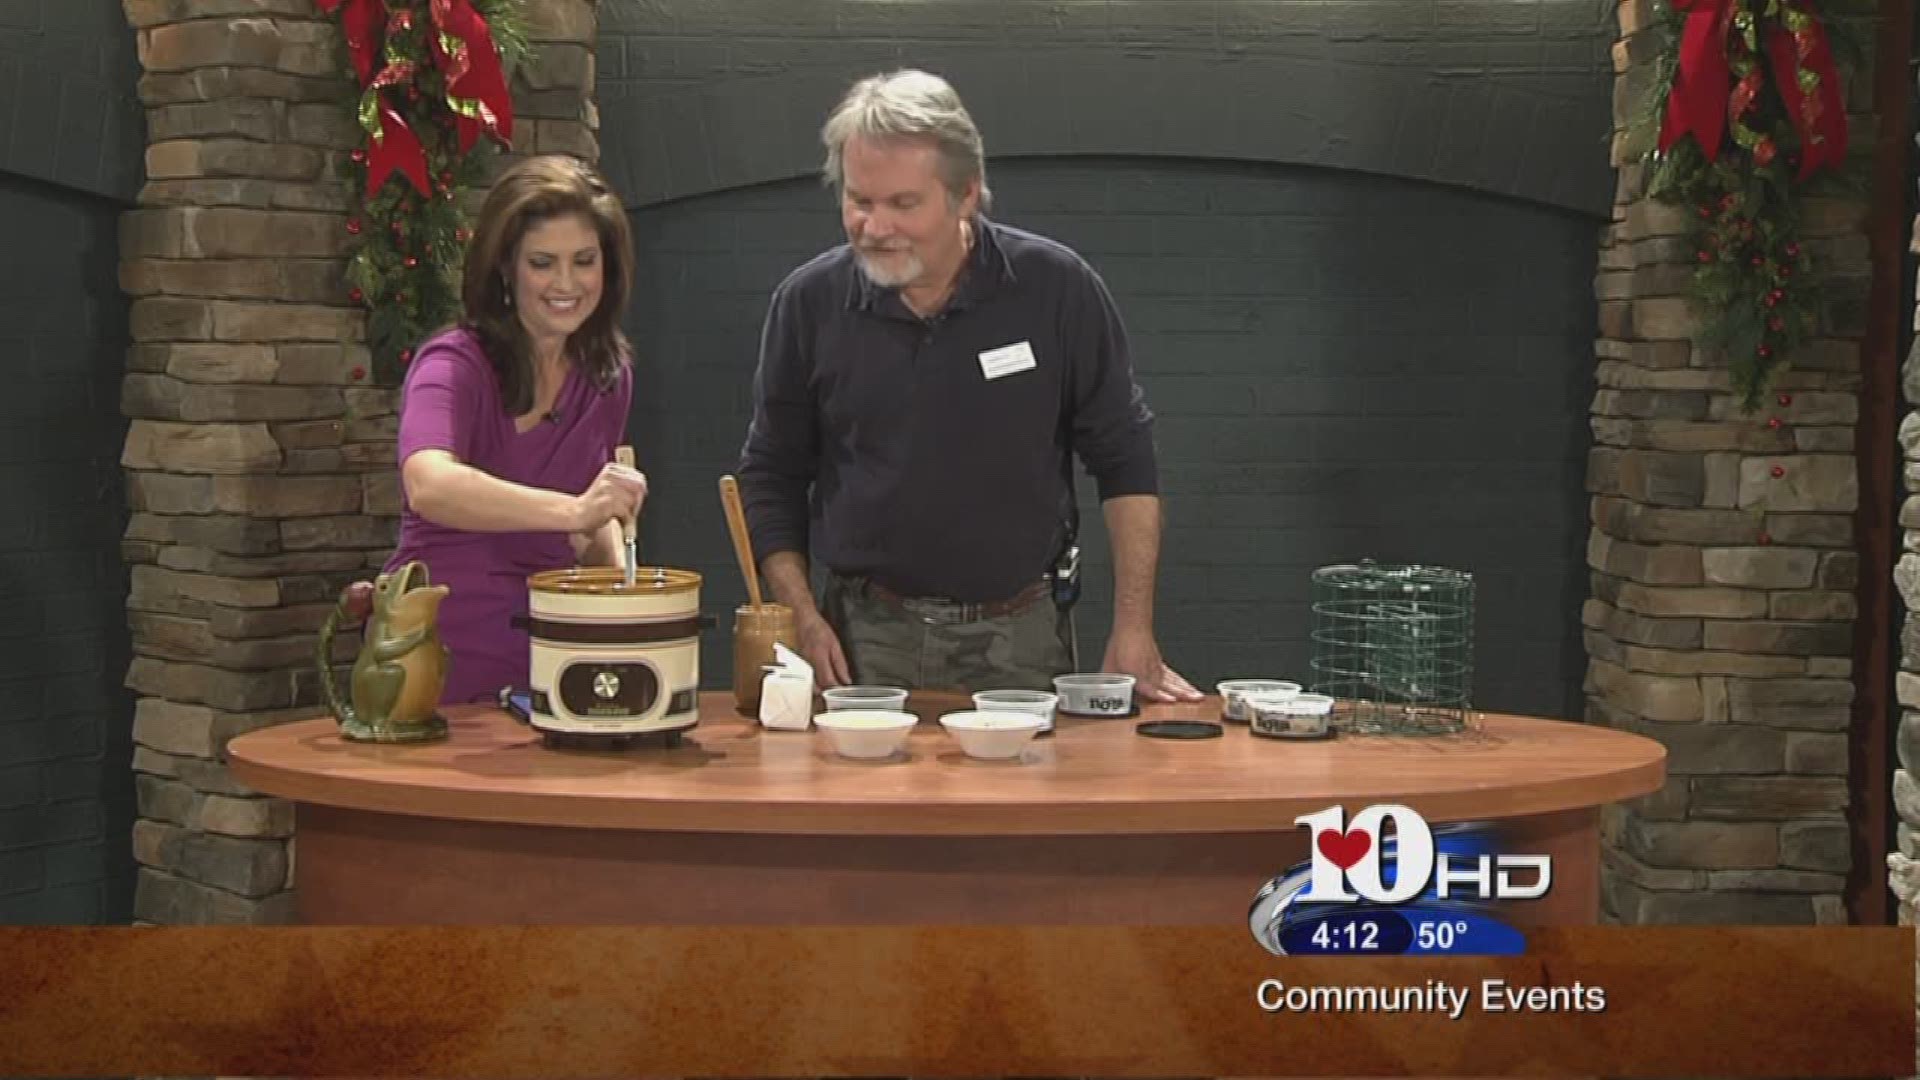 Stephen Lyn Bales from Ijams Nature Center demonstrates how to make suet cakes using a crock pot.